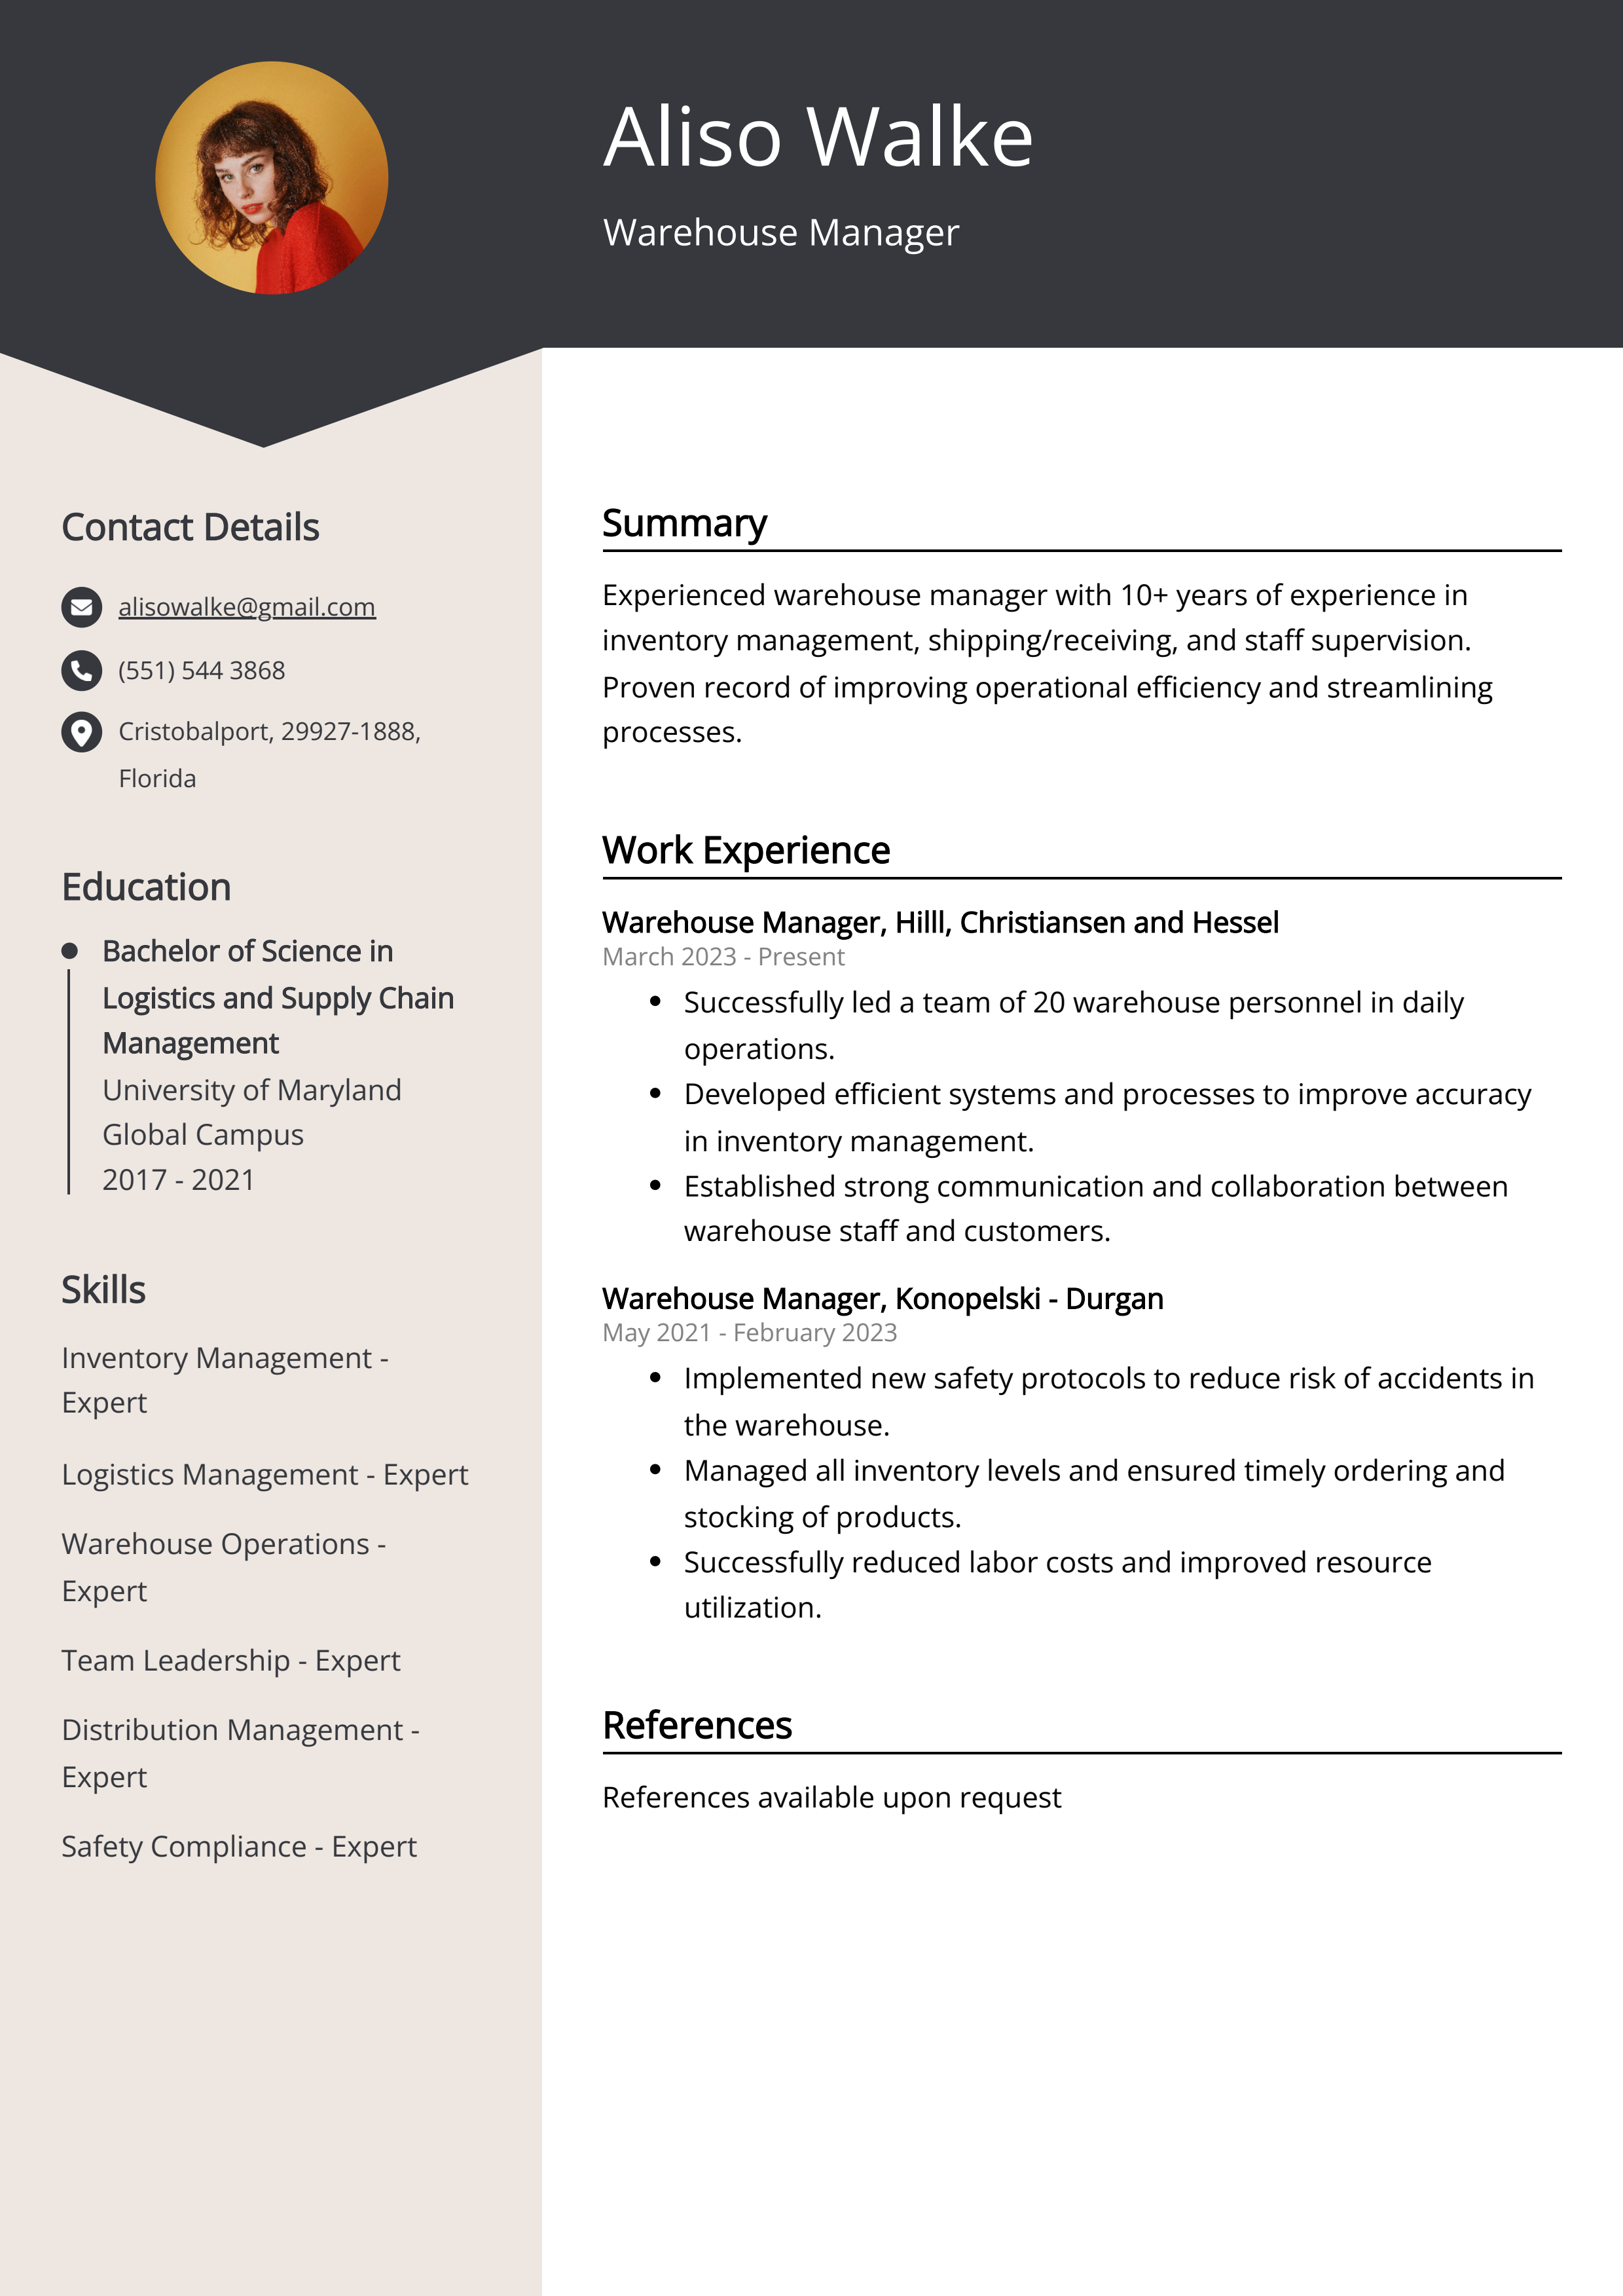 Warehouse Manager CV Example